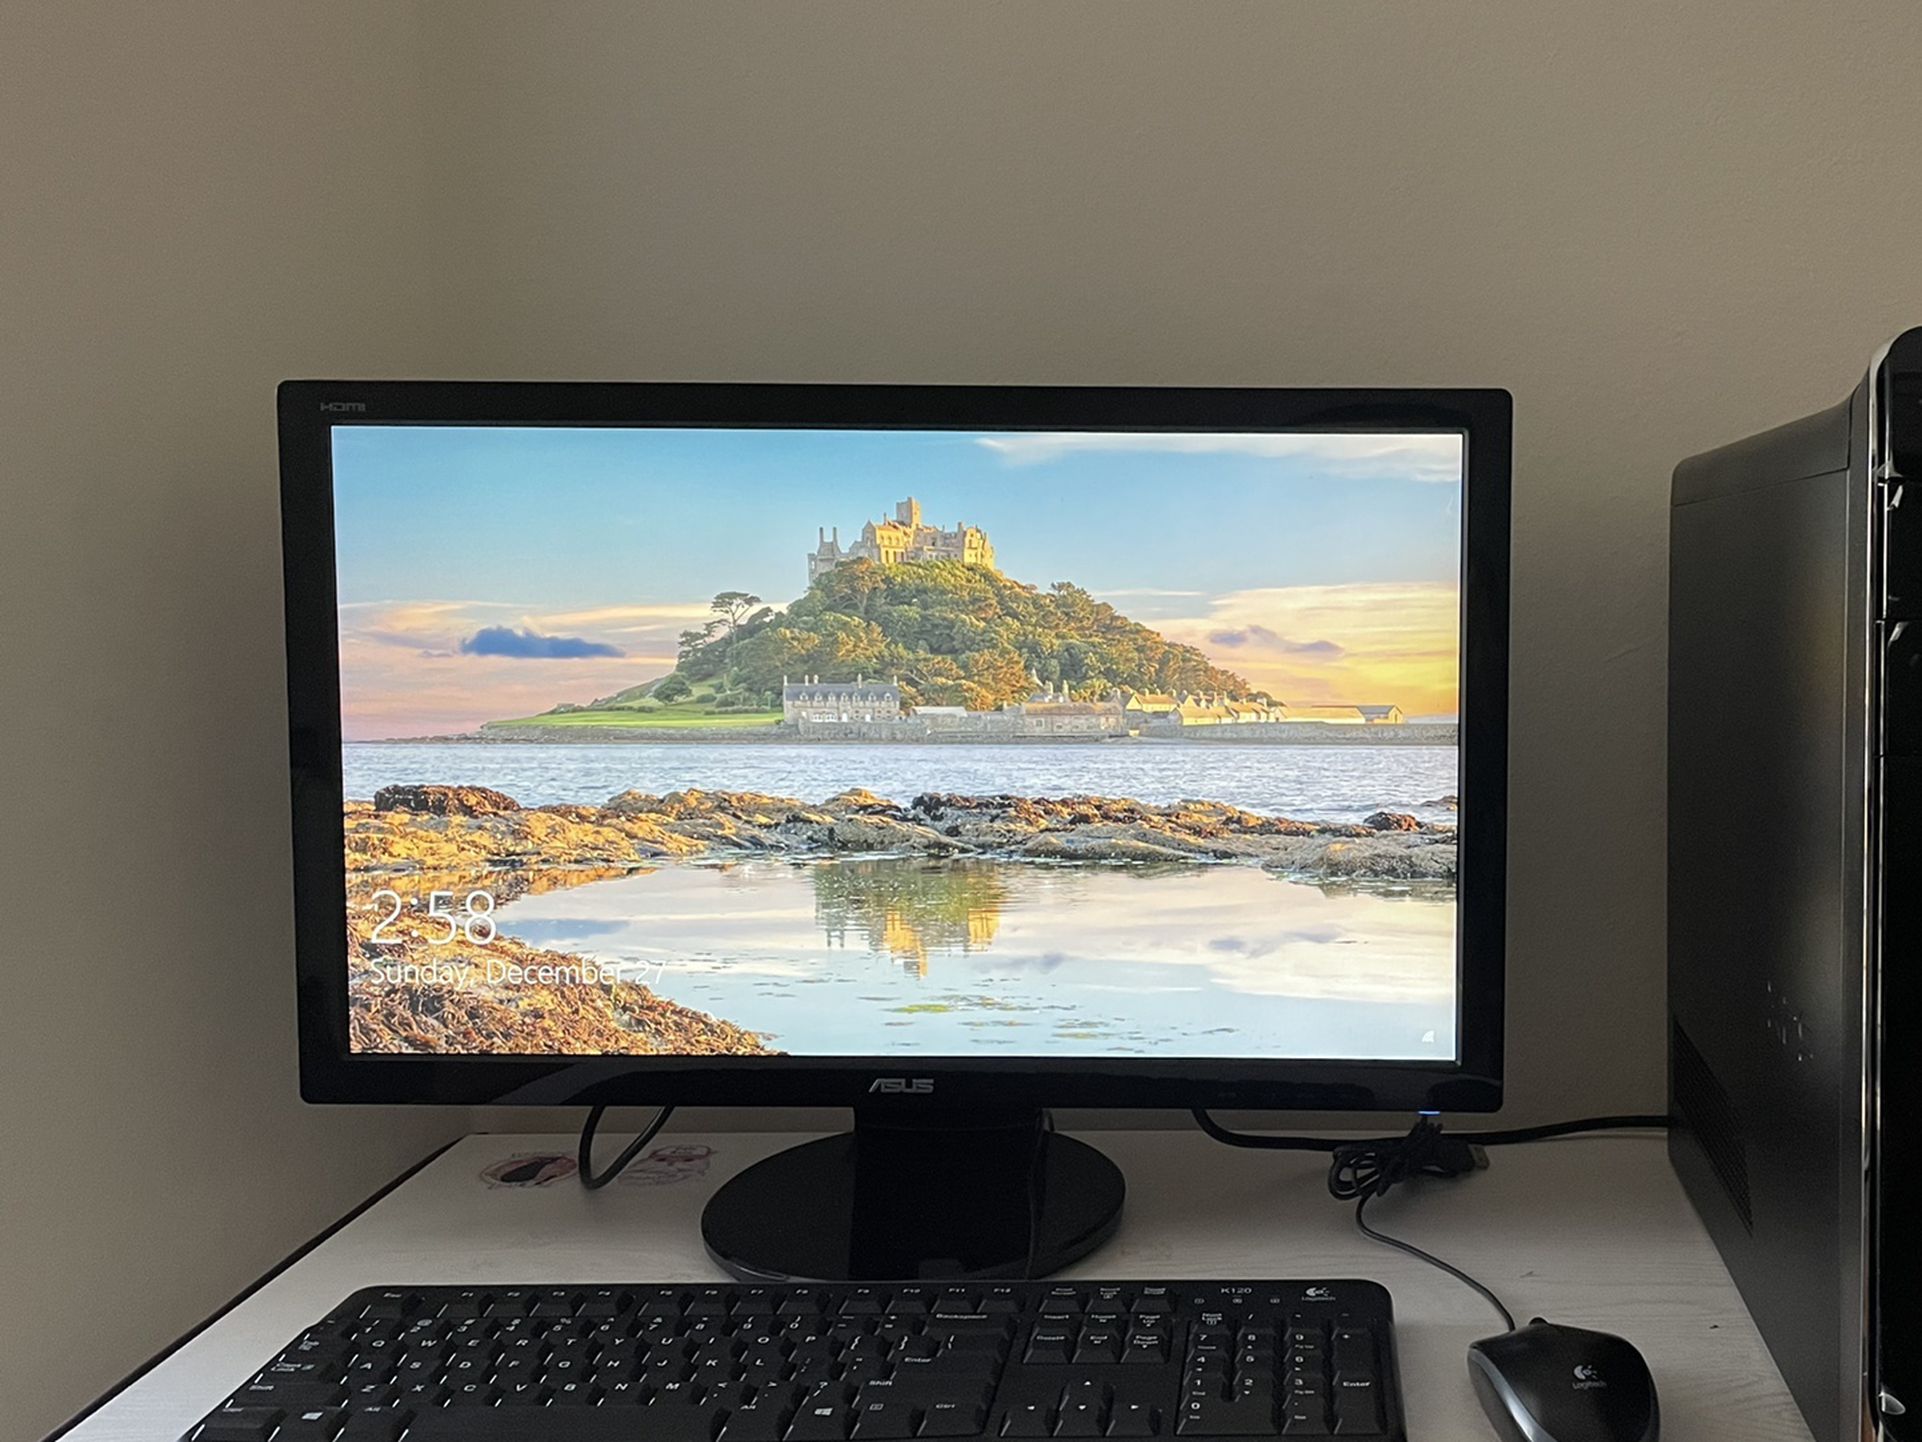 Dell Desktop i7 4790 8GB 1TB with ASUS 24' Monitor